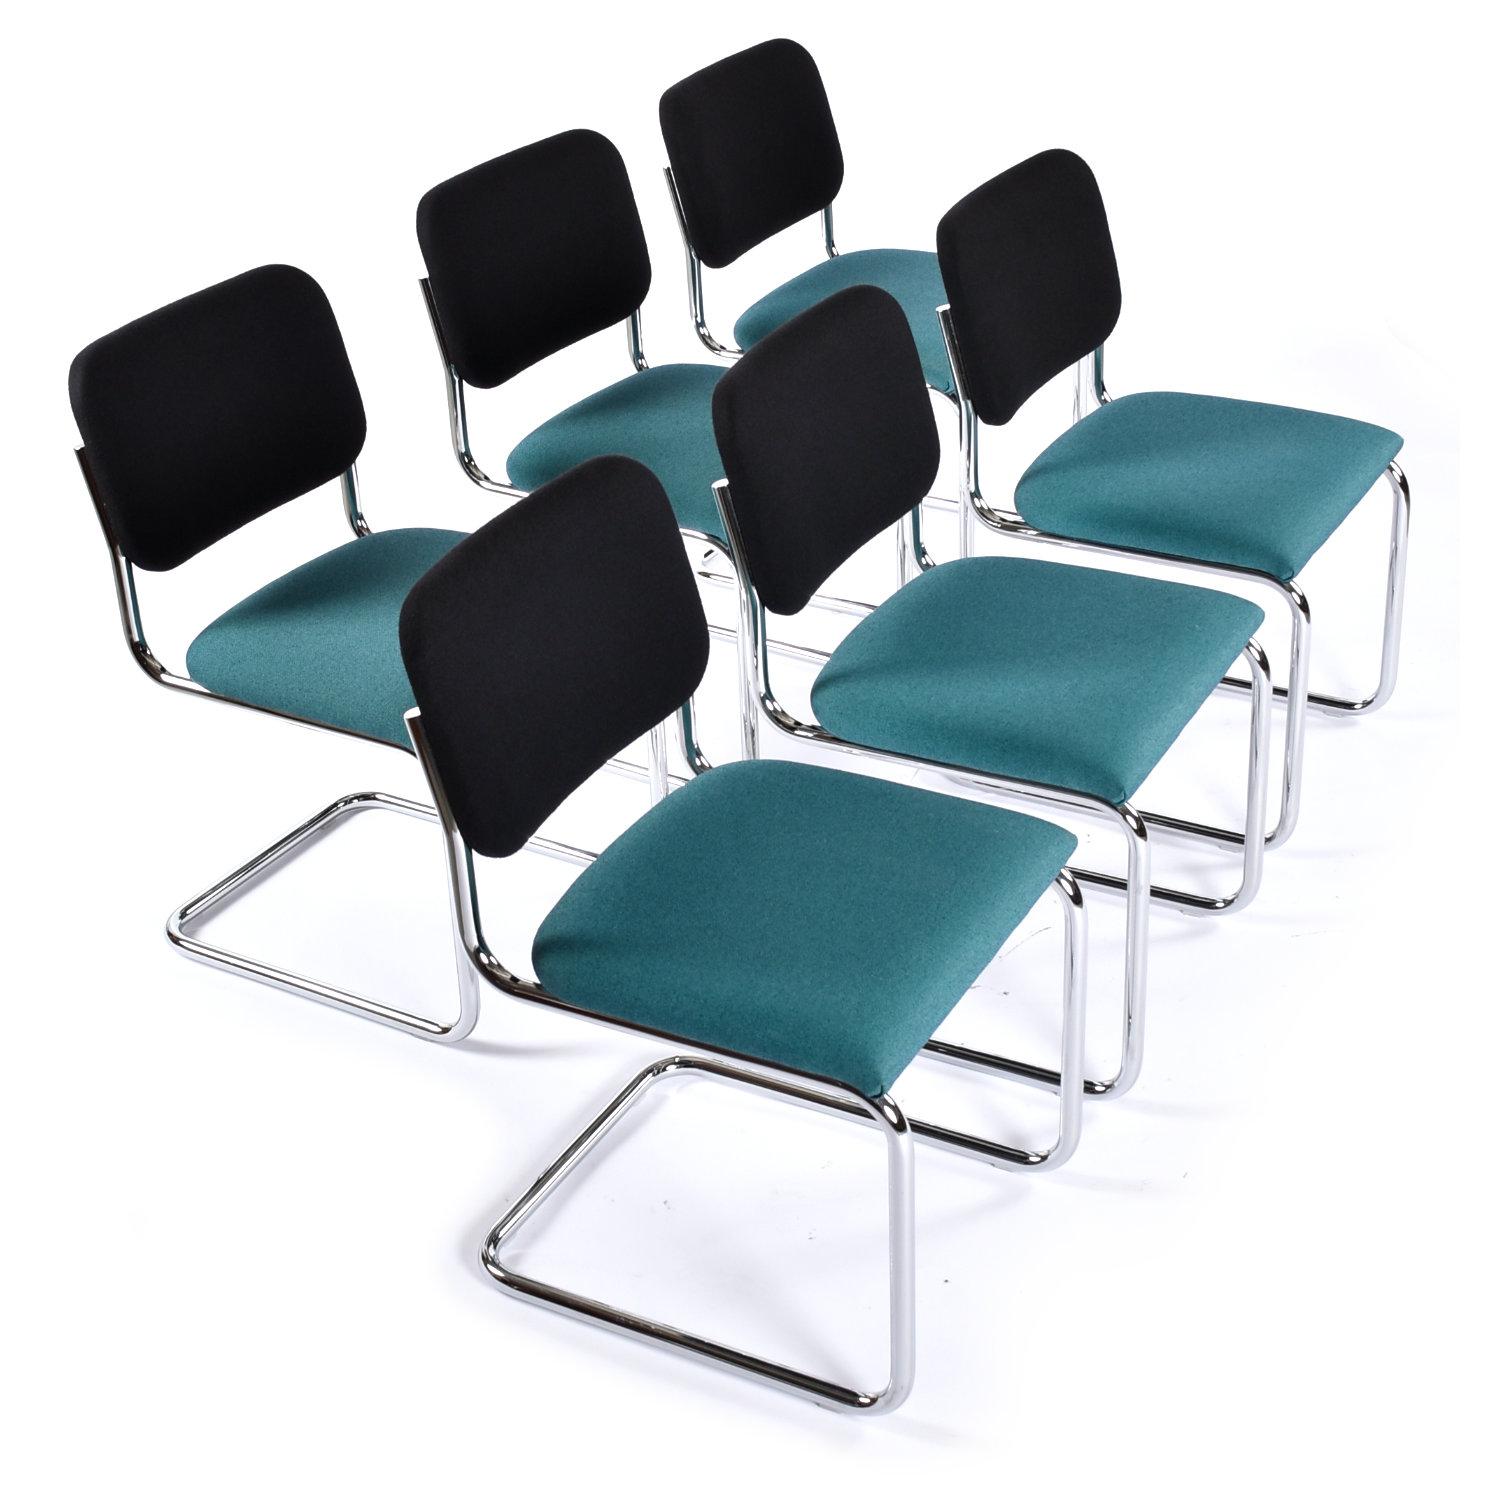 Glorious set of ten Marcel Breuer for Knoll Cesca chairs. The authentic chairs have the Knoll Studios name and Marcel Breuer’s signature embossed on the metal frames. This particular set dates to 2019 and looks to have been scarcely used. The upper